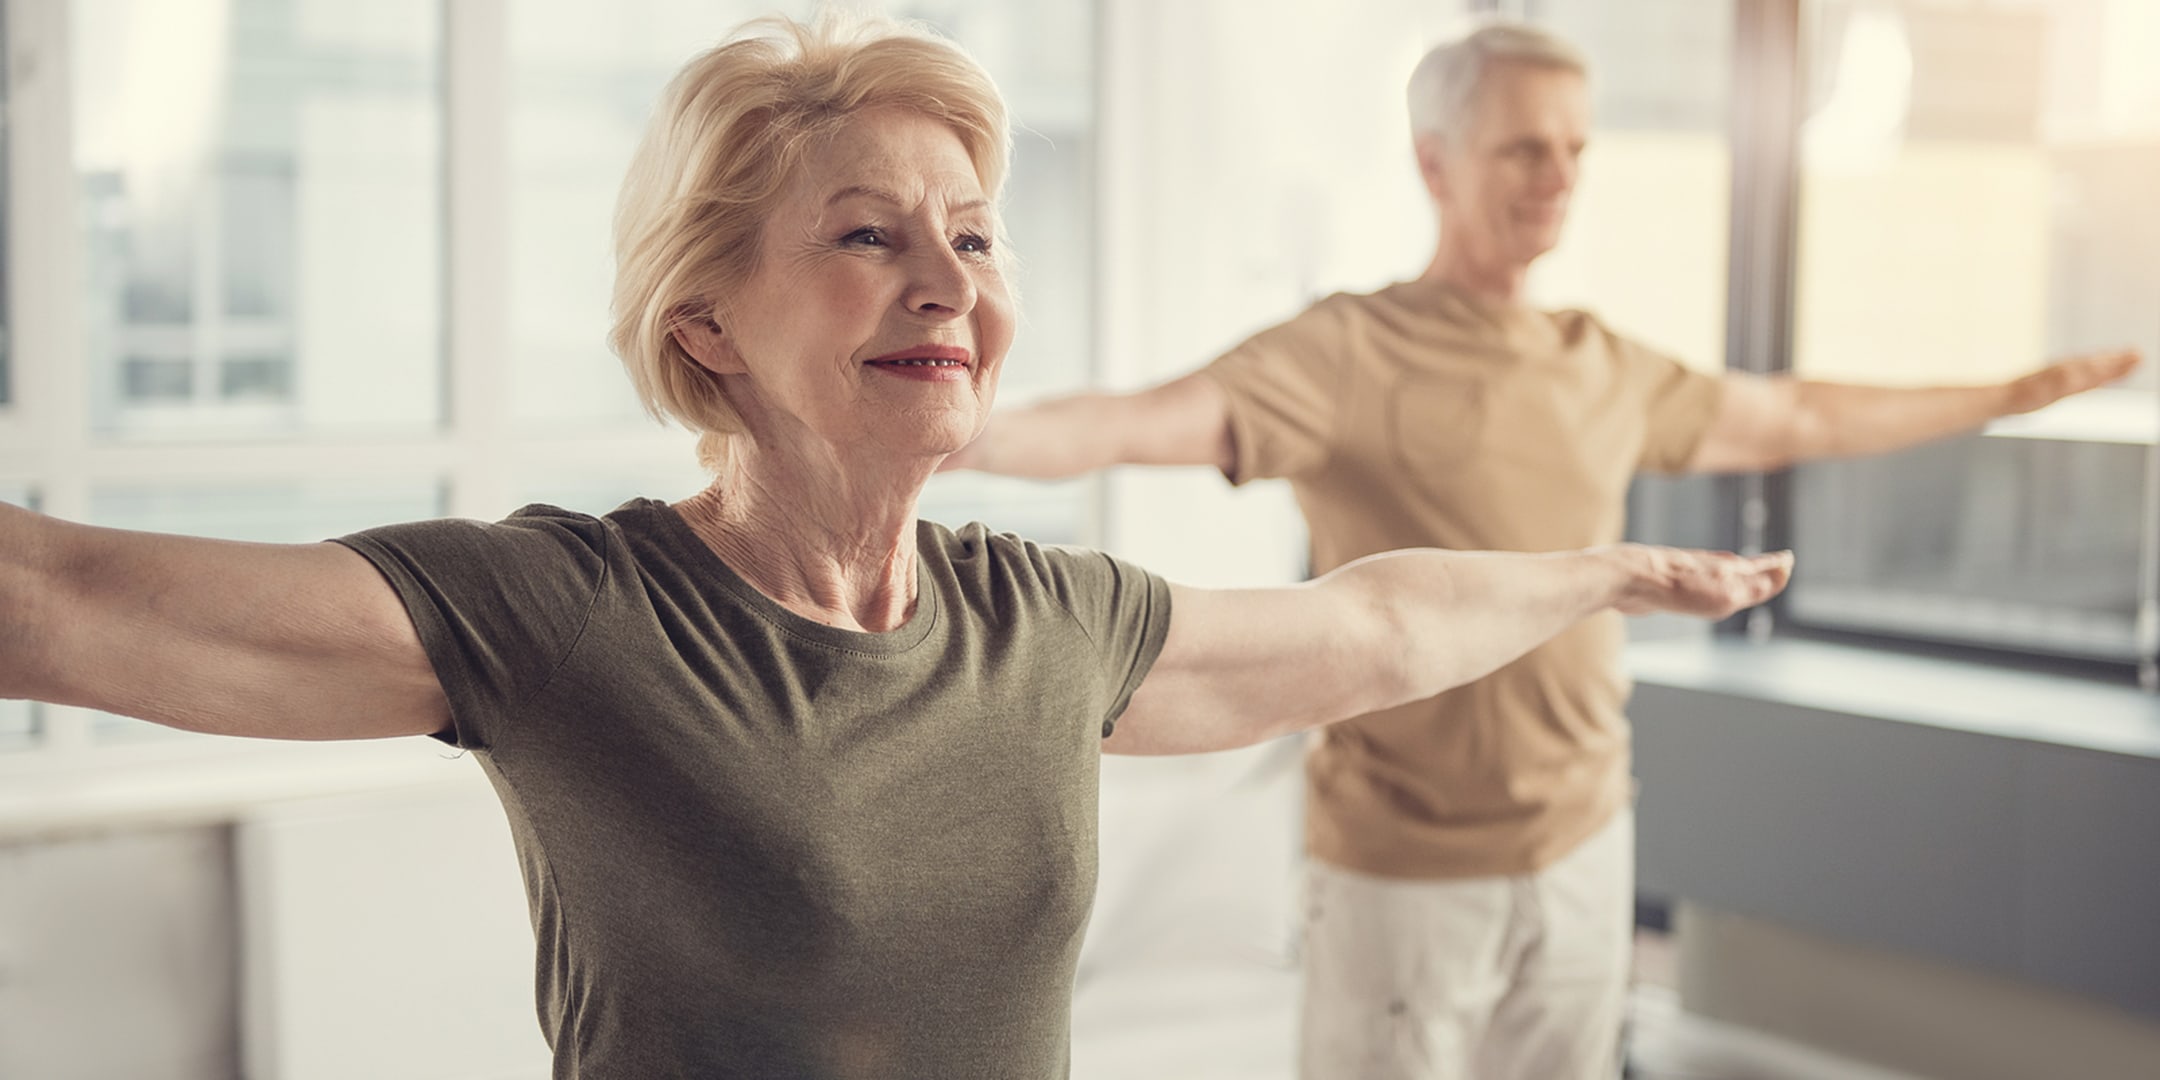 Balance Exercises for Seniors - Home Help for Seniors, Senior Home Care  Helping Seniors Live Well at Home | Home Care Powered by AUAF